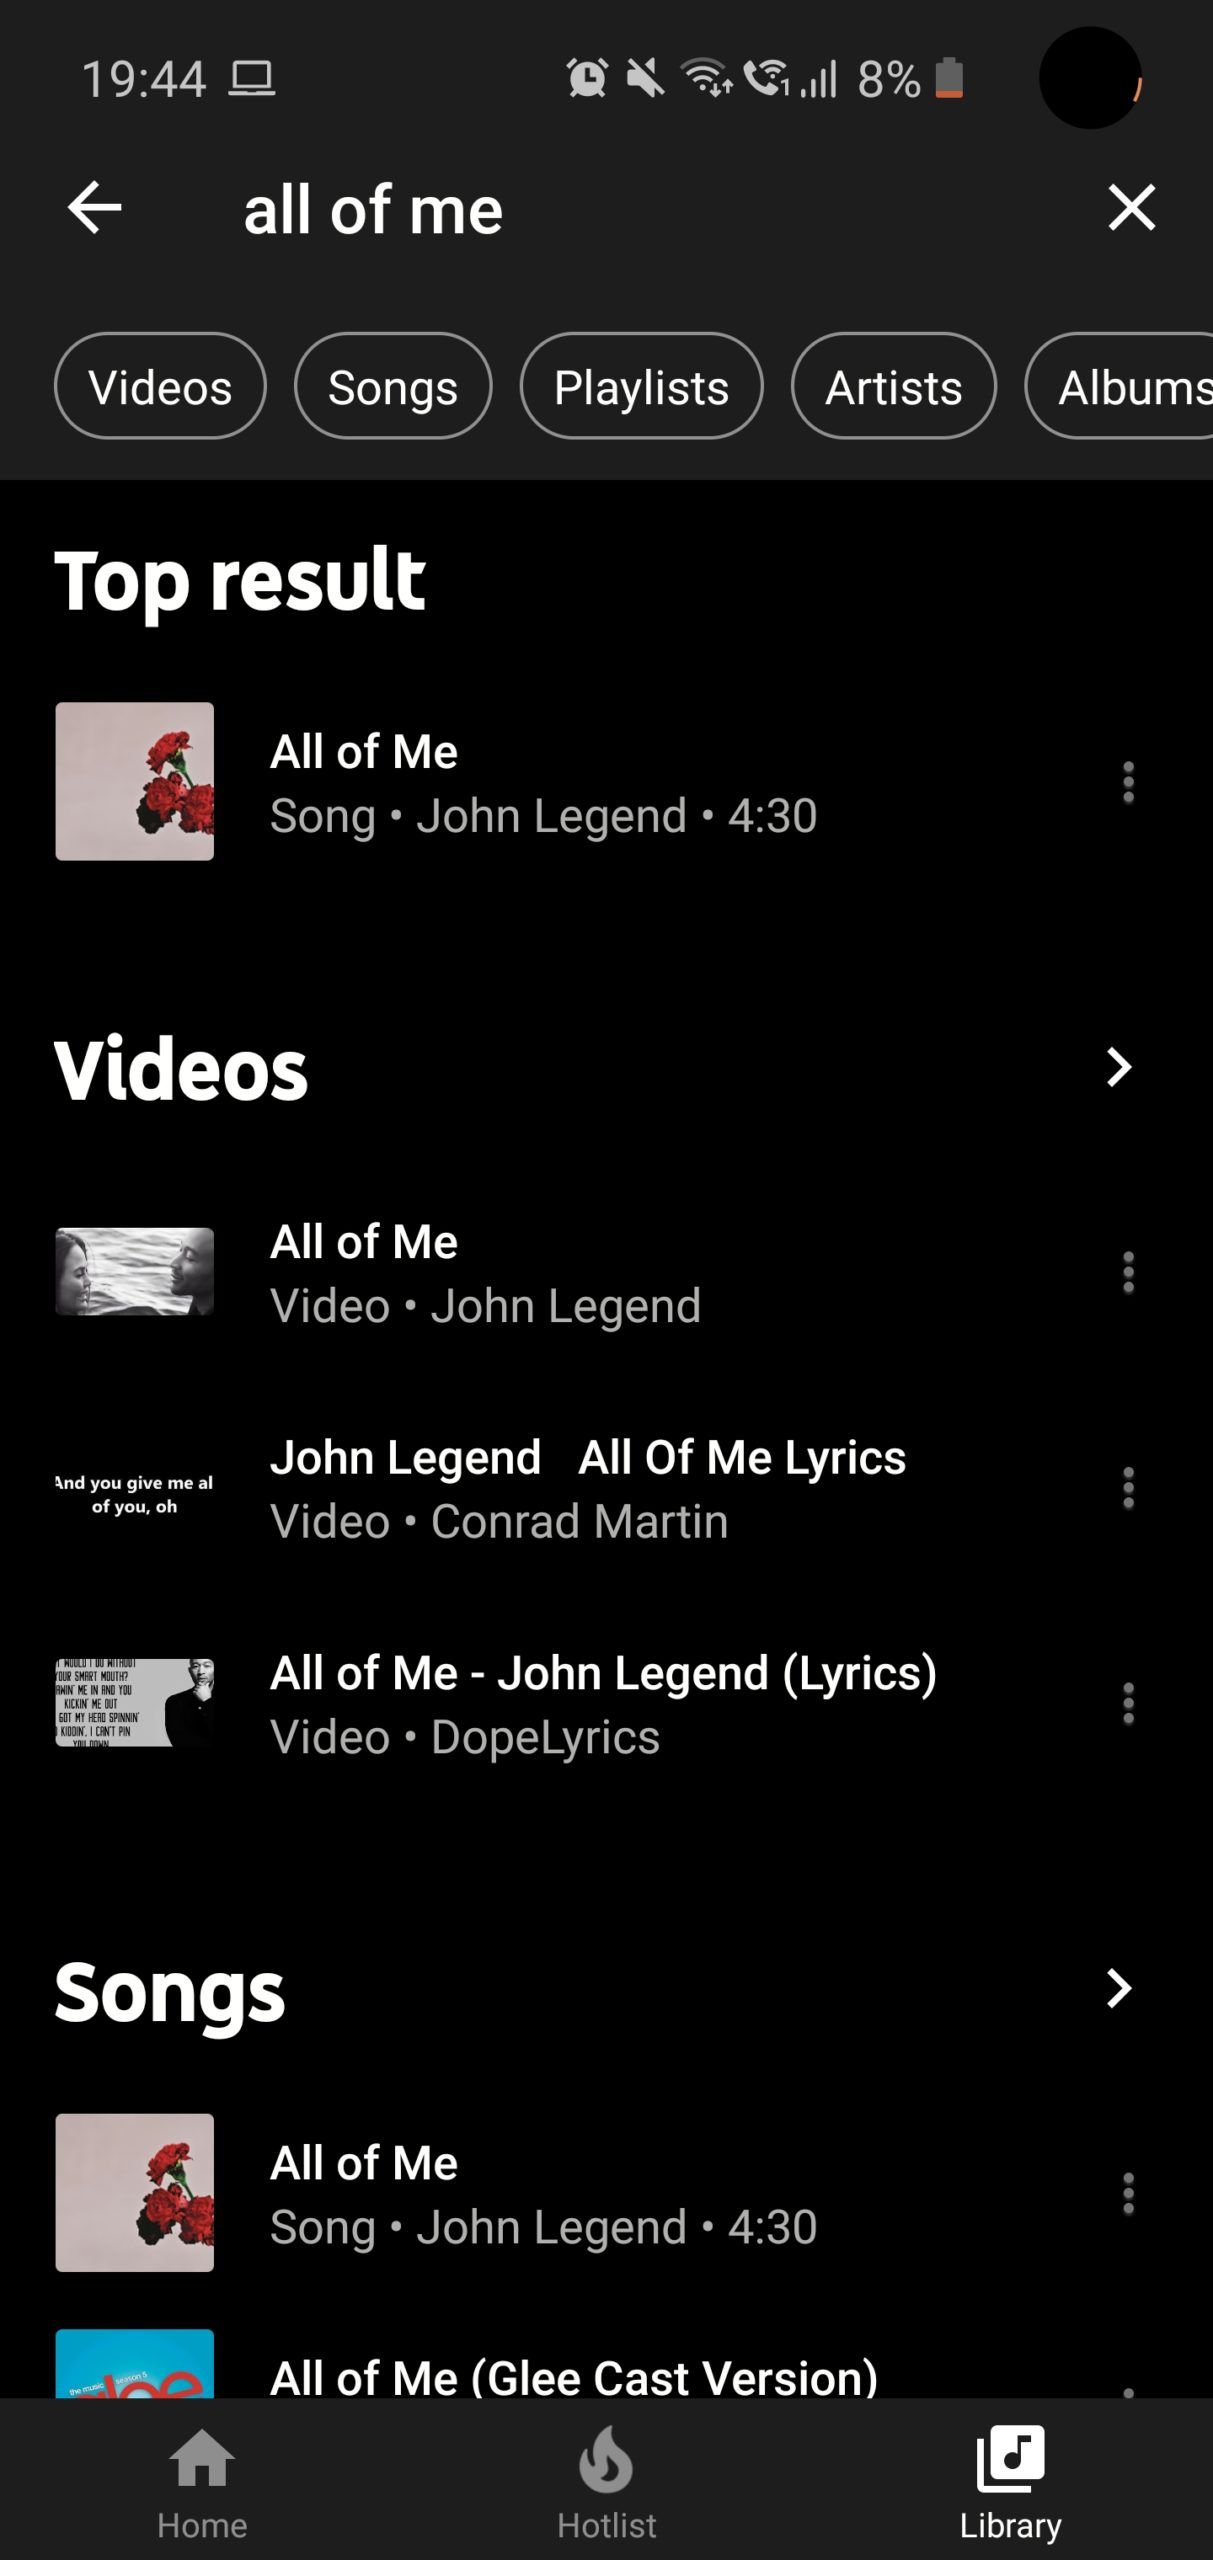 Search results in YouTube Music